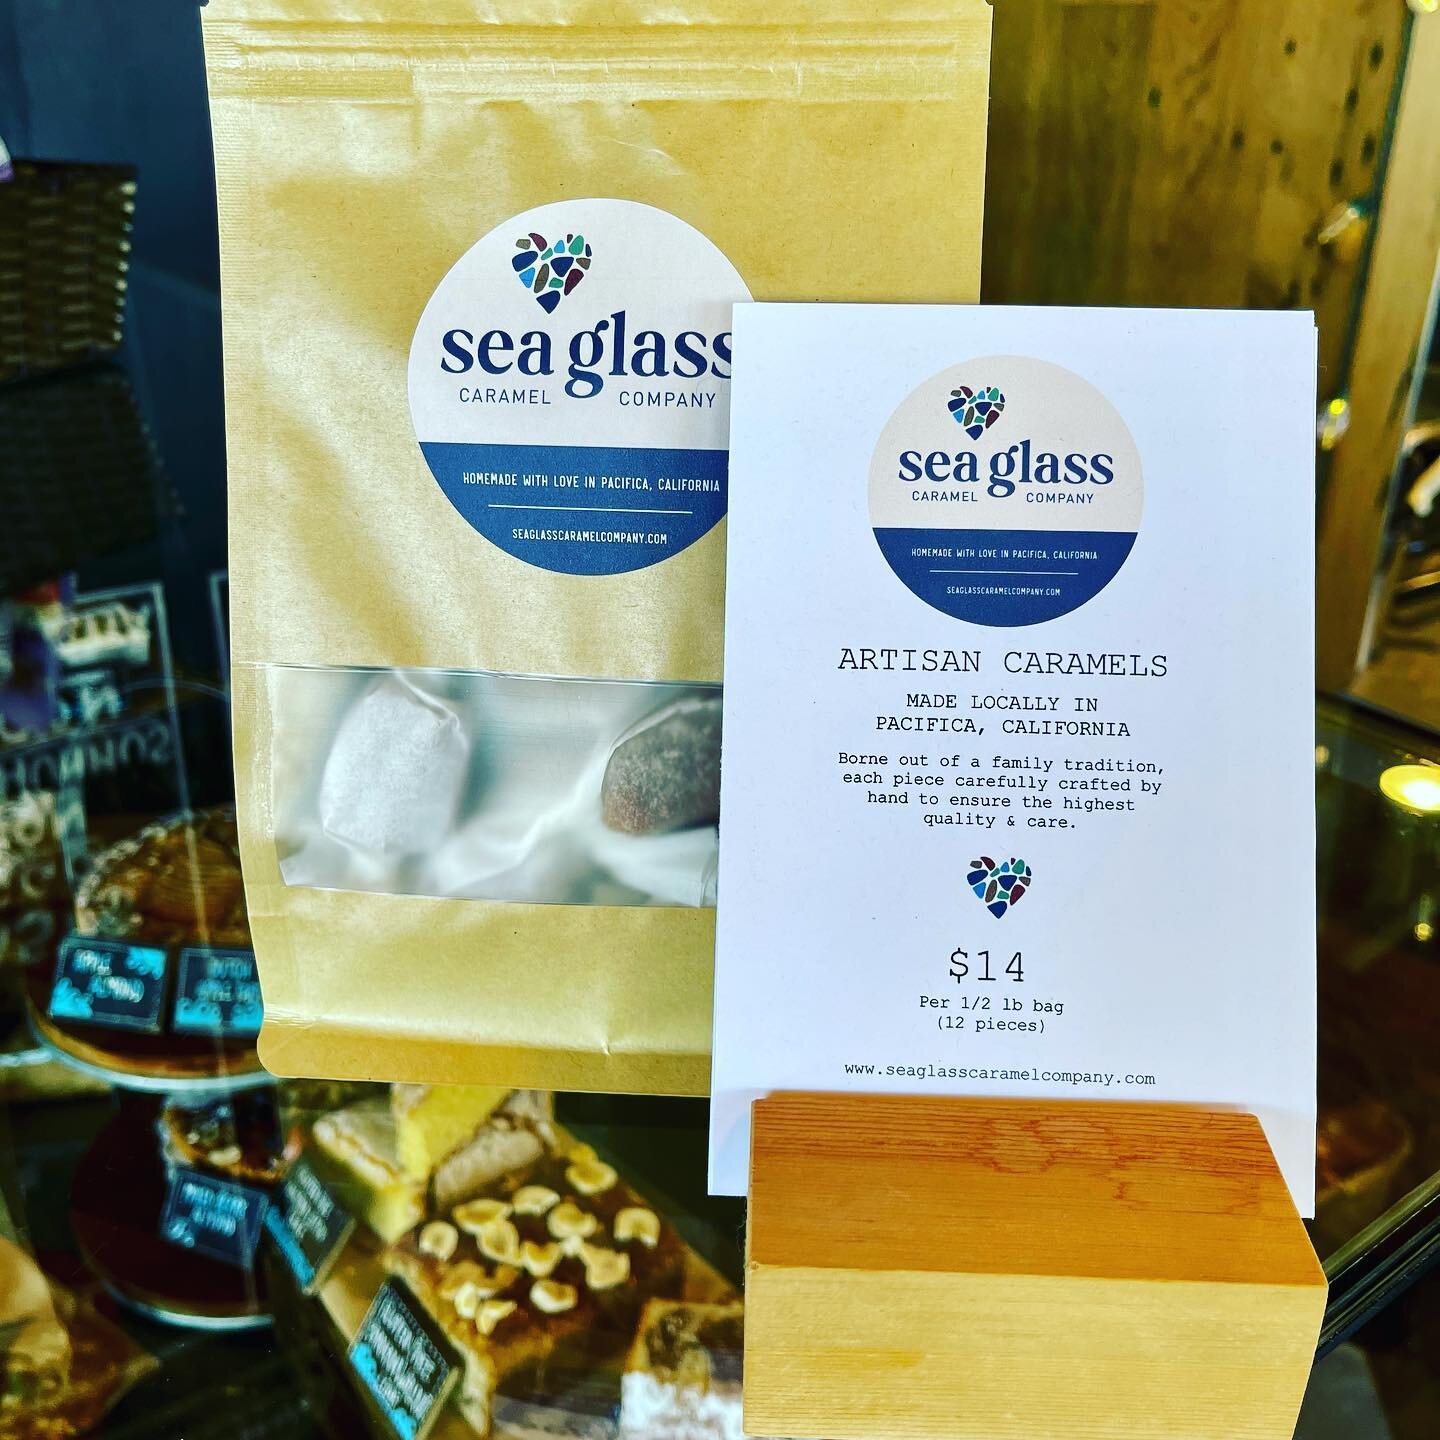 We are soo stoked to introduce #seaglasscaramelcompany #soulgrindcoffeeroasters in Pacifica. If you haven&rsquo;t tried this delicious, mouth watering old school Carmel then it&rsquo;s TIME!!